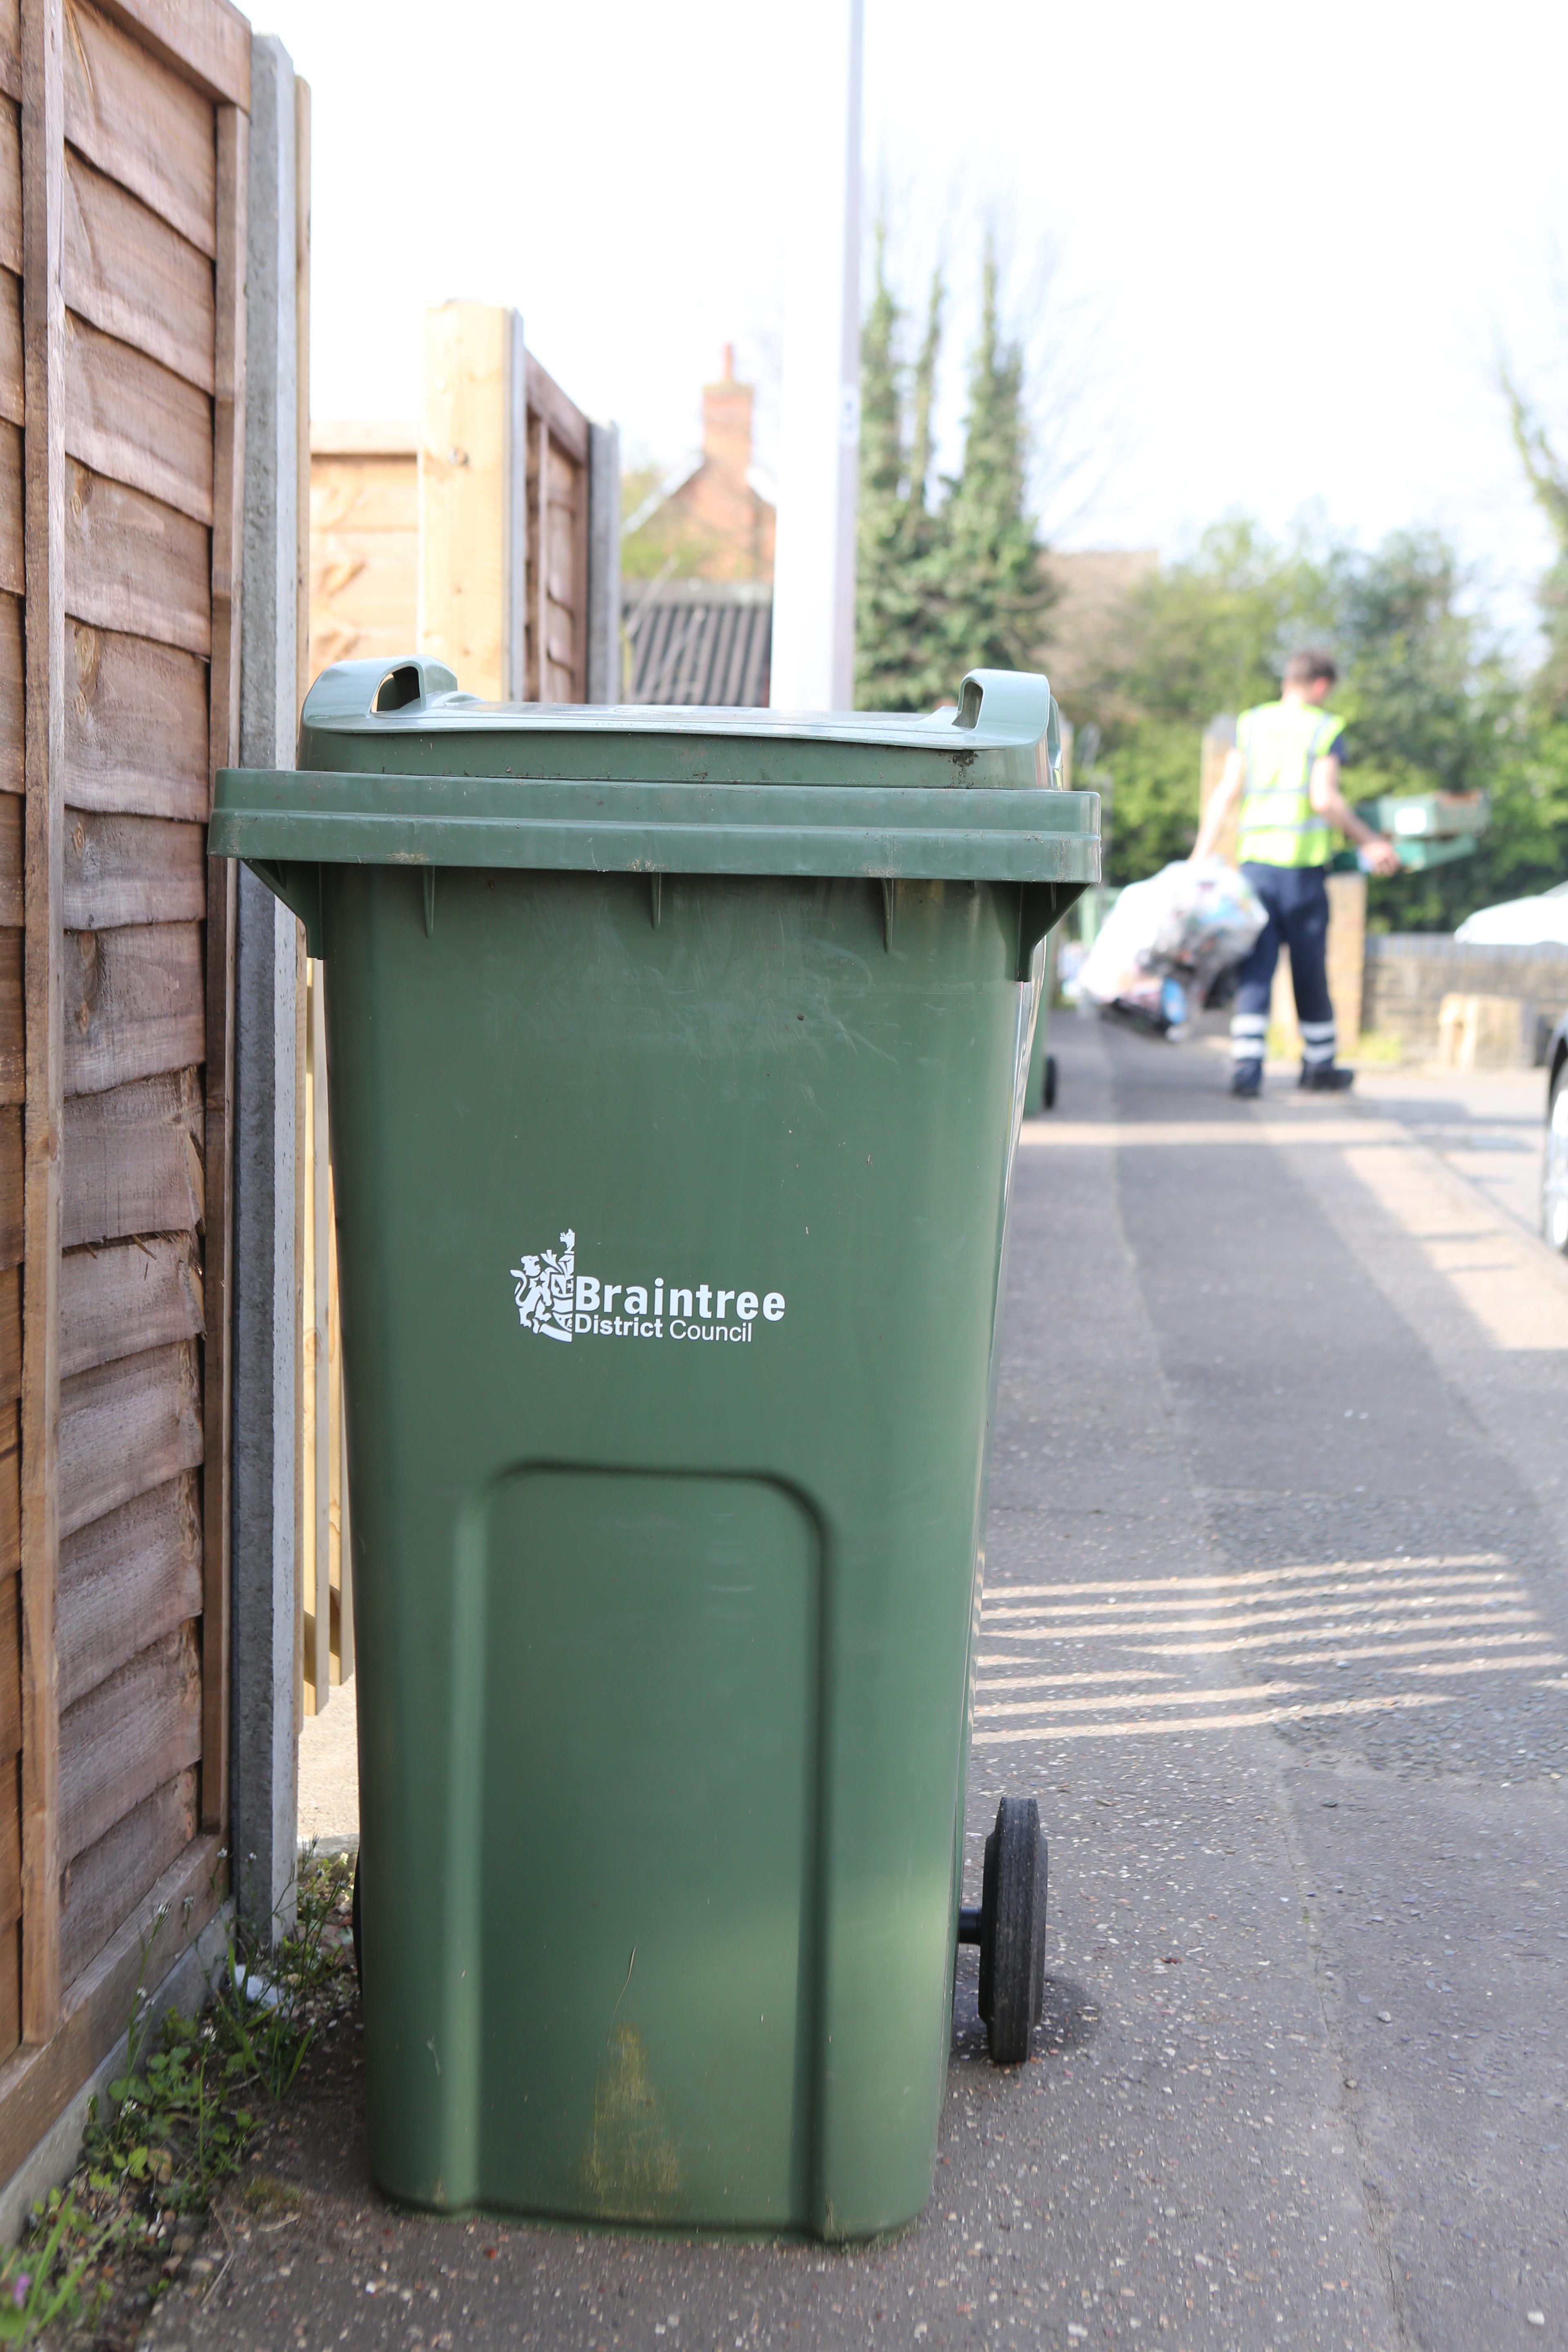 image shows garden waste bin presented at kerbside ready for collection